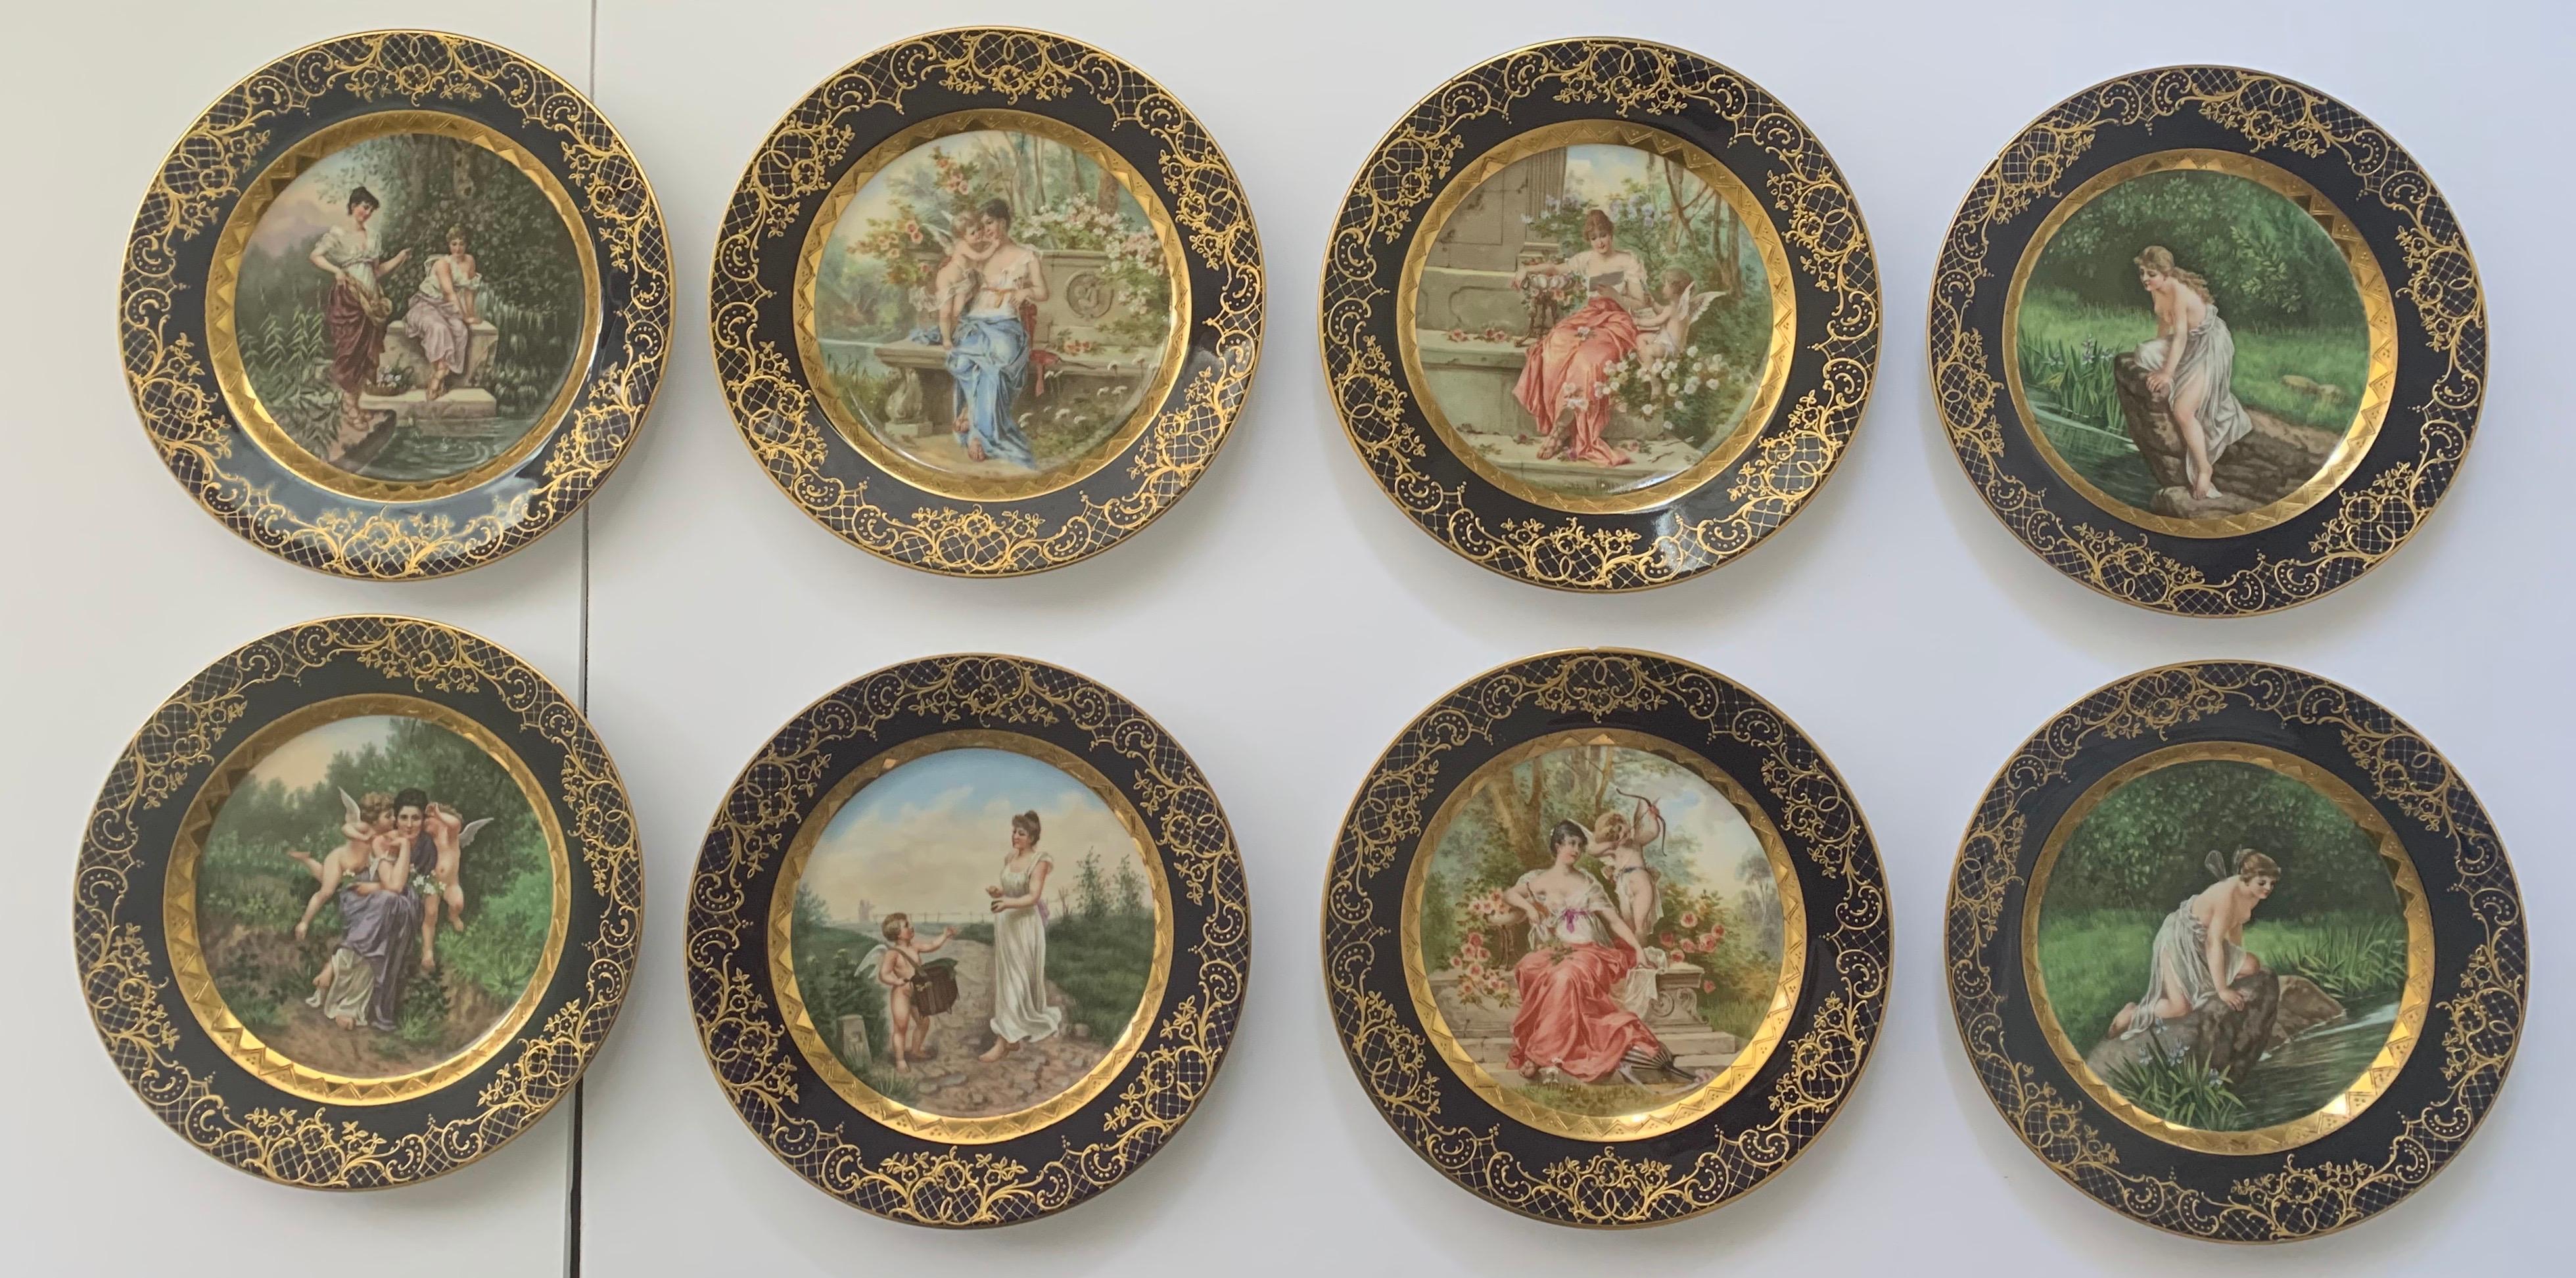 Set of 8 antique Dresden cabinet plates. Each plate features a different hand painted allegorical scene. Each plate has a very dark blue border with gold raised detailing. All plates are signed Dresden on the underside.